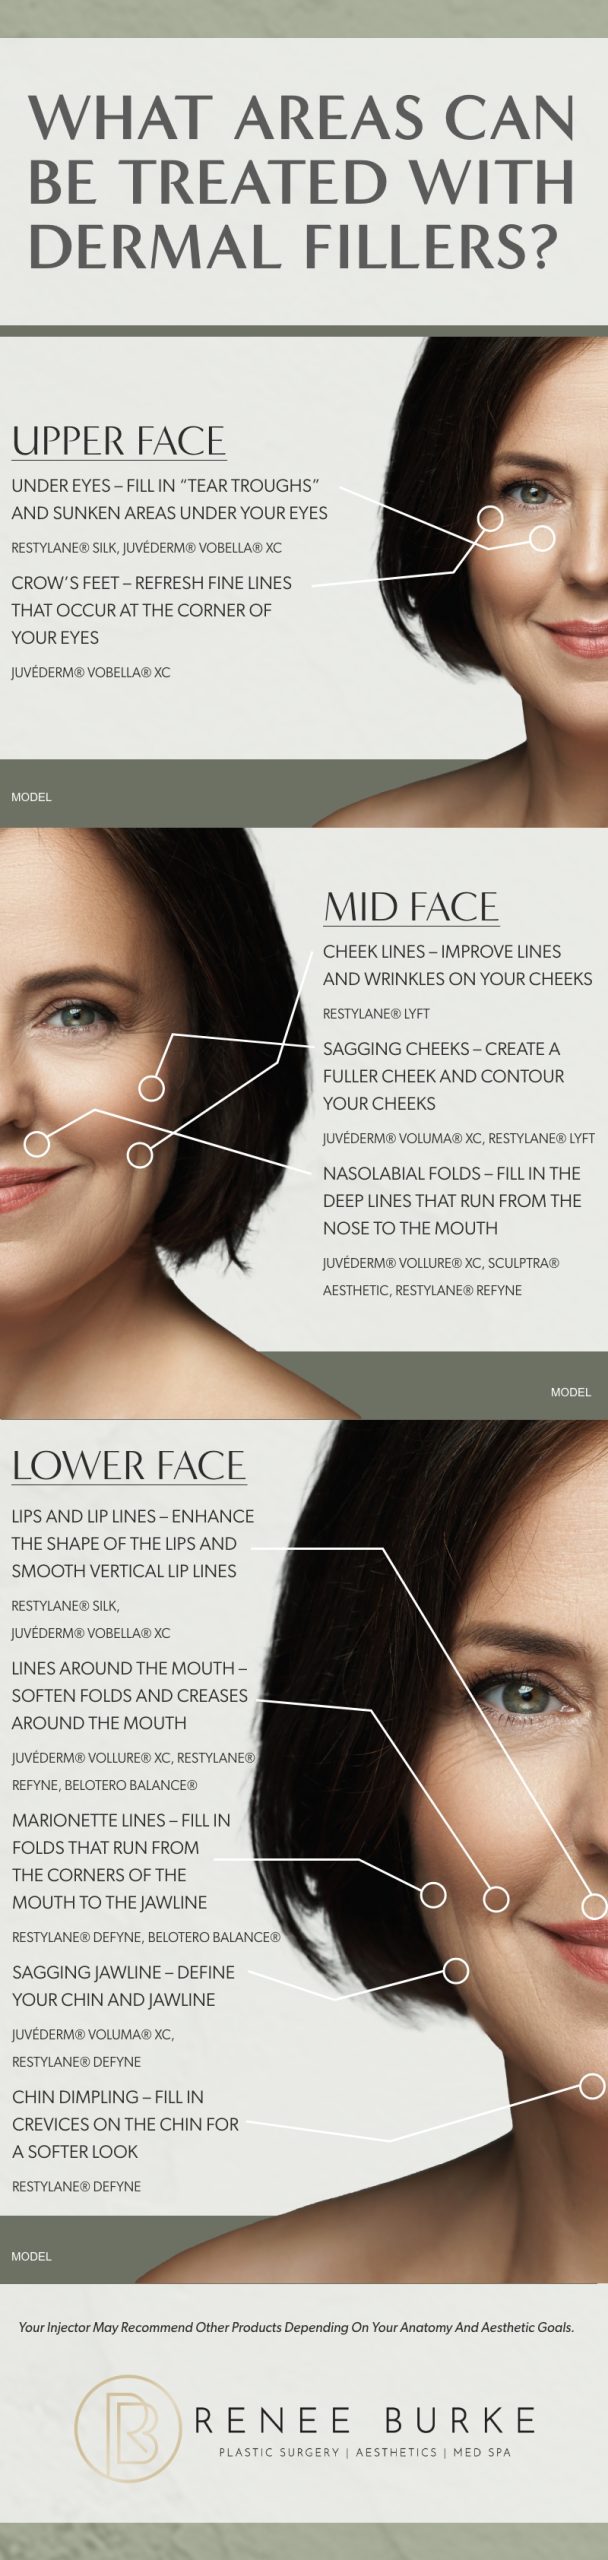 "What Areas Can Be Treated With Dermal Fillers?" Instagraphic